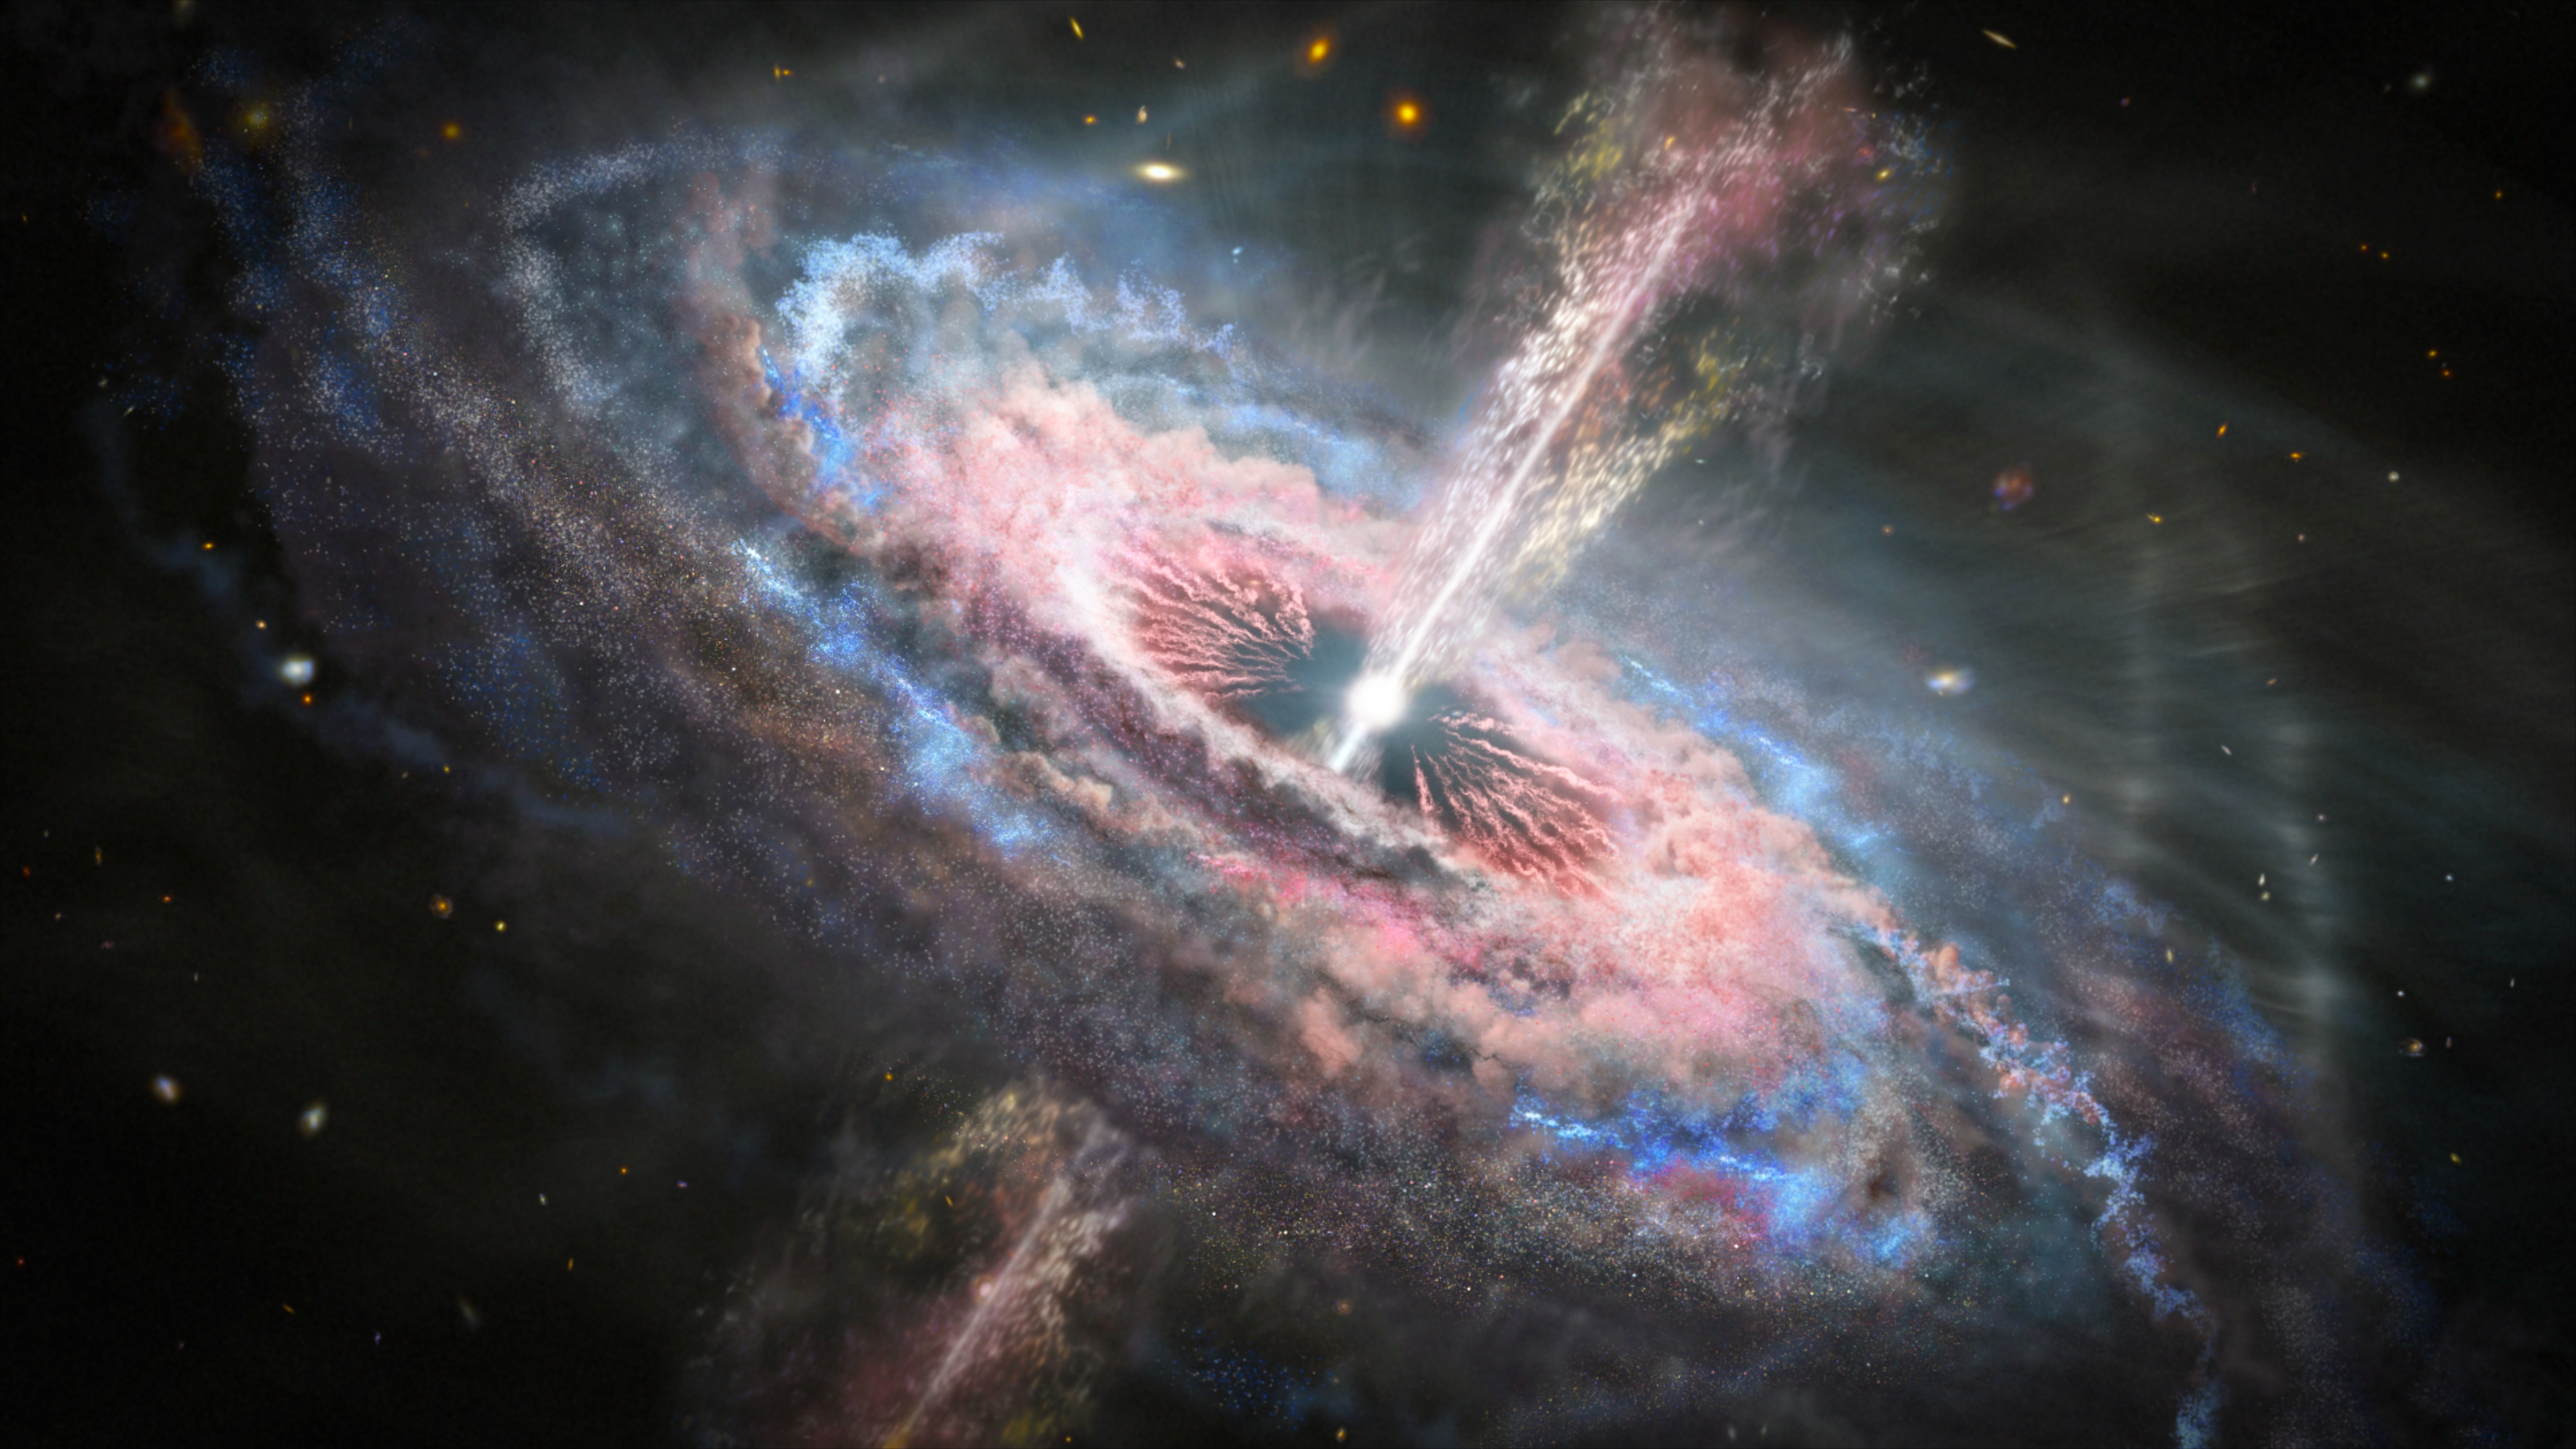 This is an artist's concept of a galaxy with a brilliant quasar at its center.